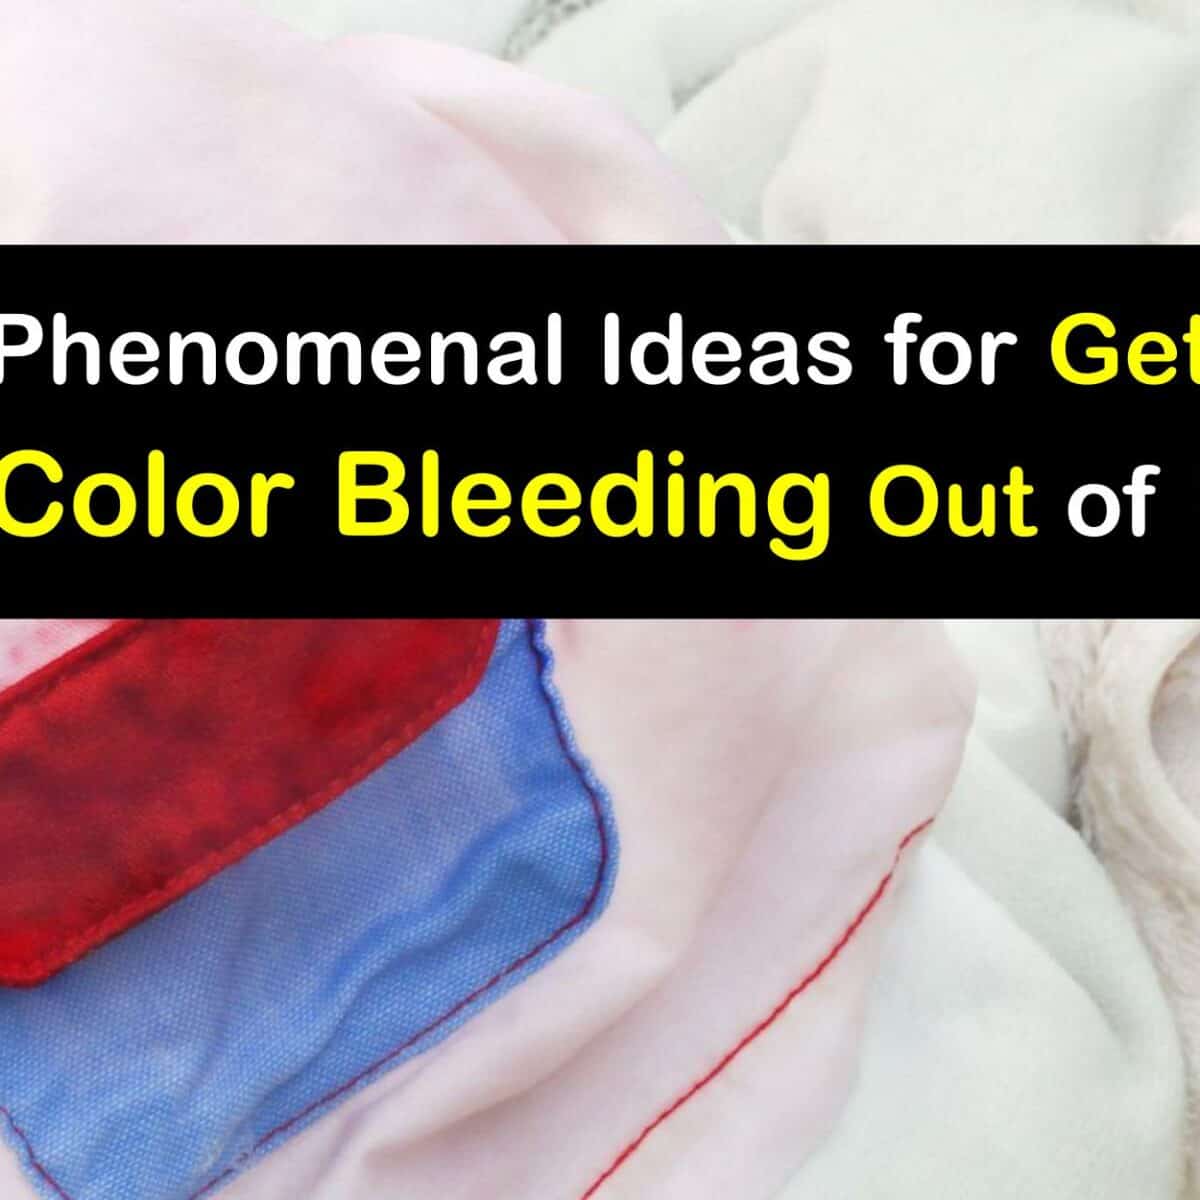 Eliminate Color Bleed Stains - Remove Color Bleed from Clothes